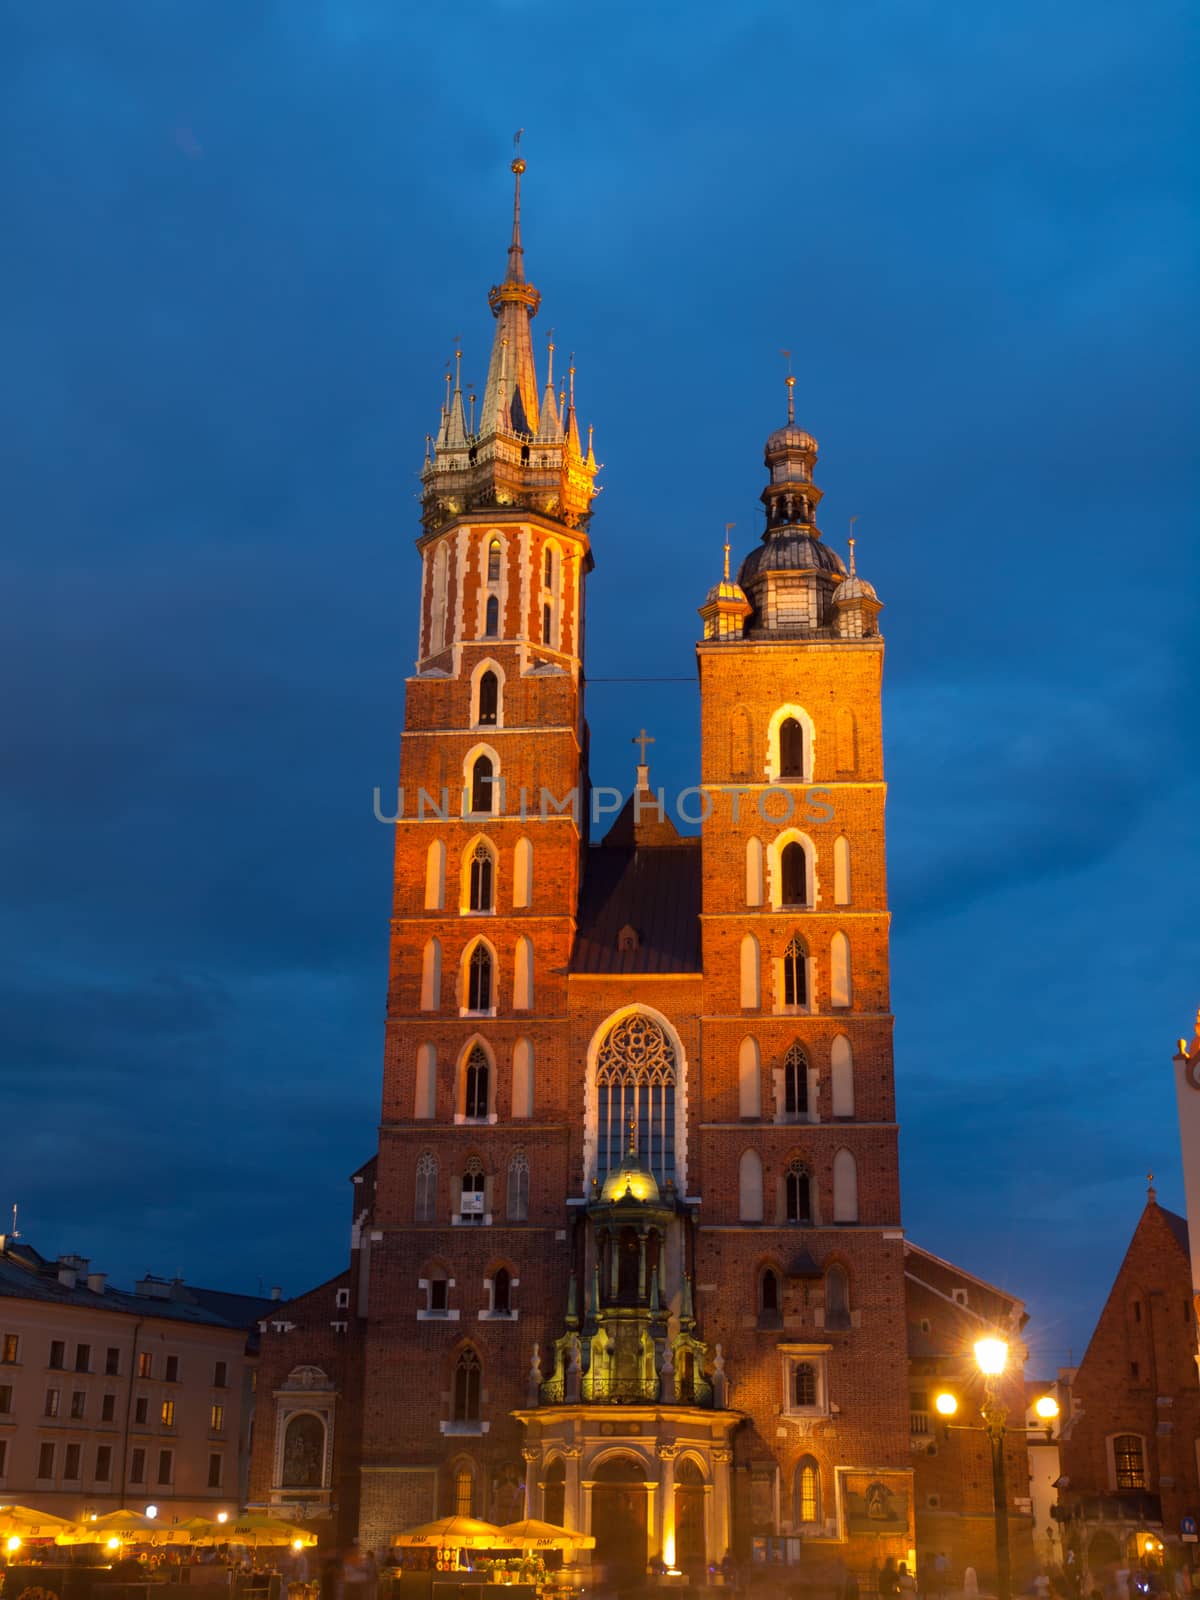 St. Mary's Church with two different towers by night (Krakow, Poland). Front view.